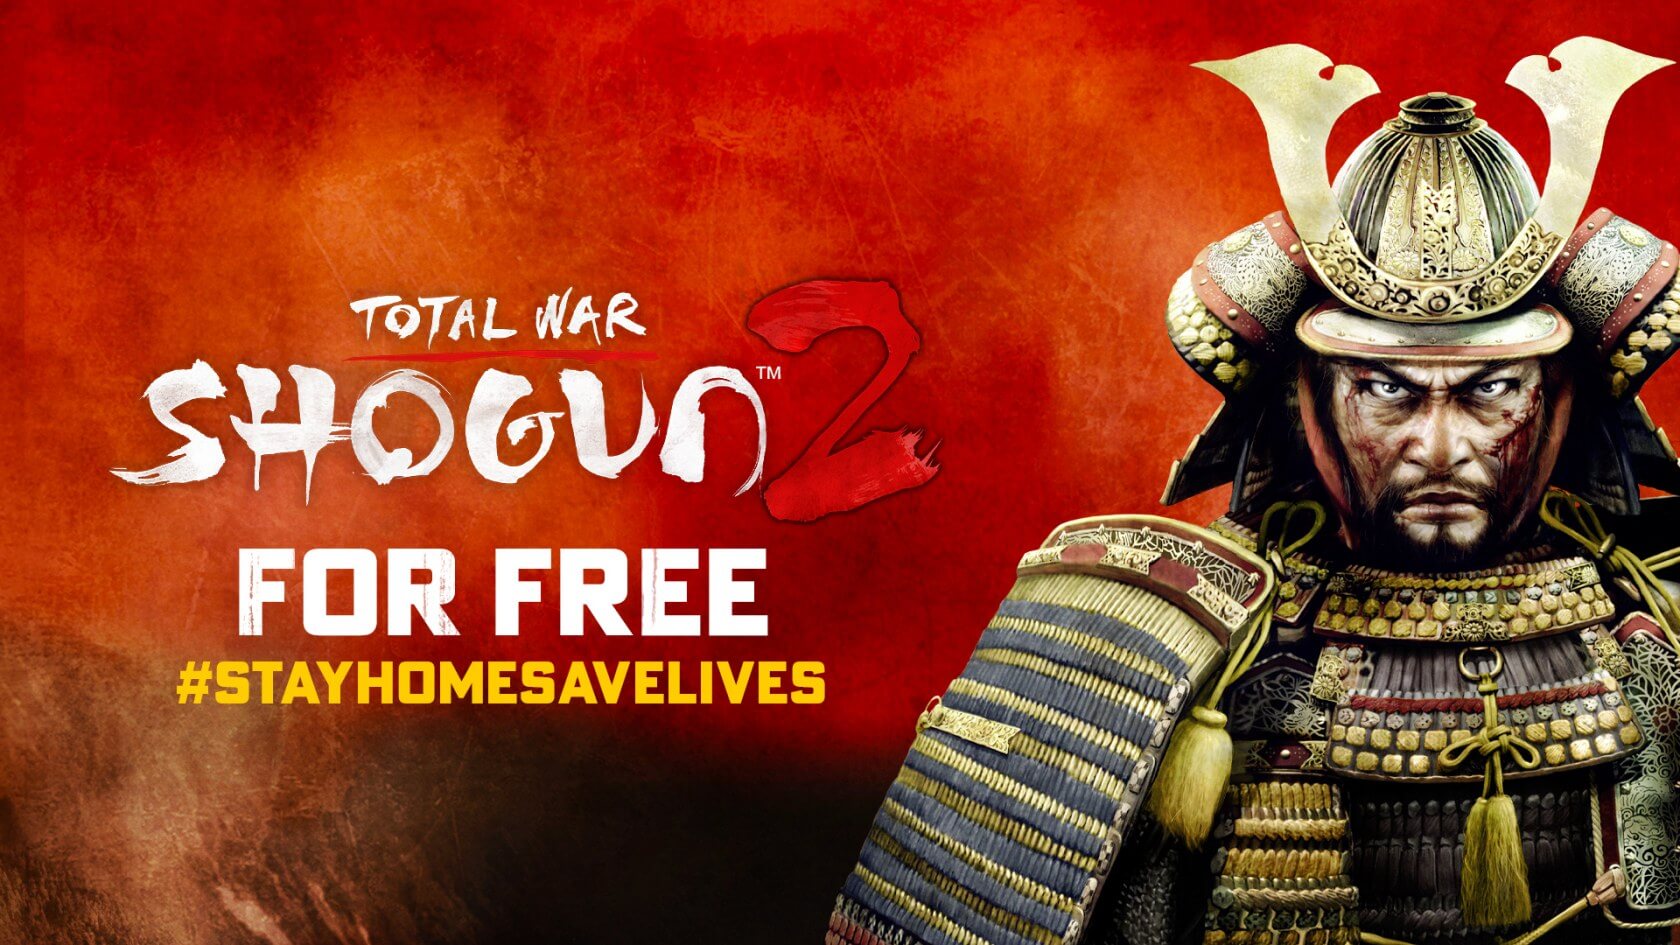 You can grab Total War: Shogun 2 for free until May 1